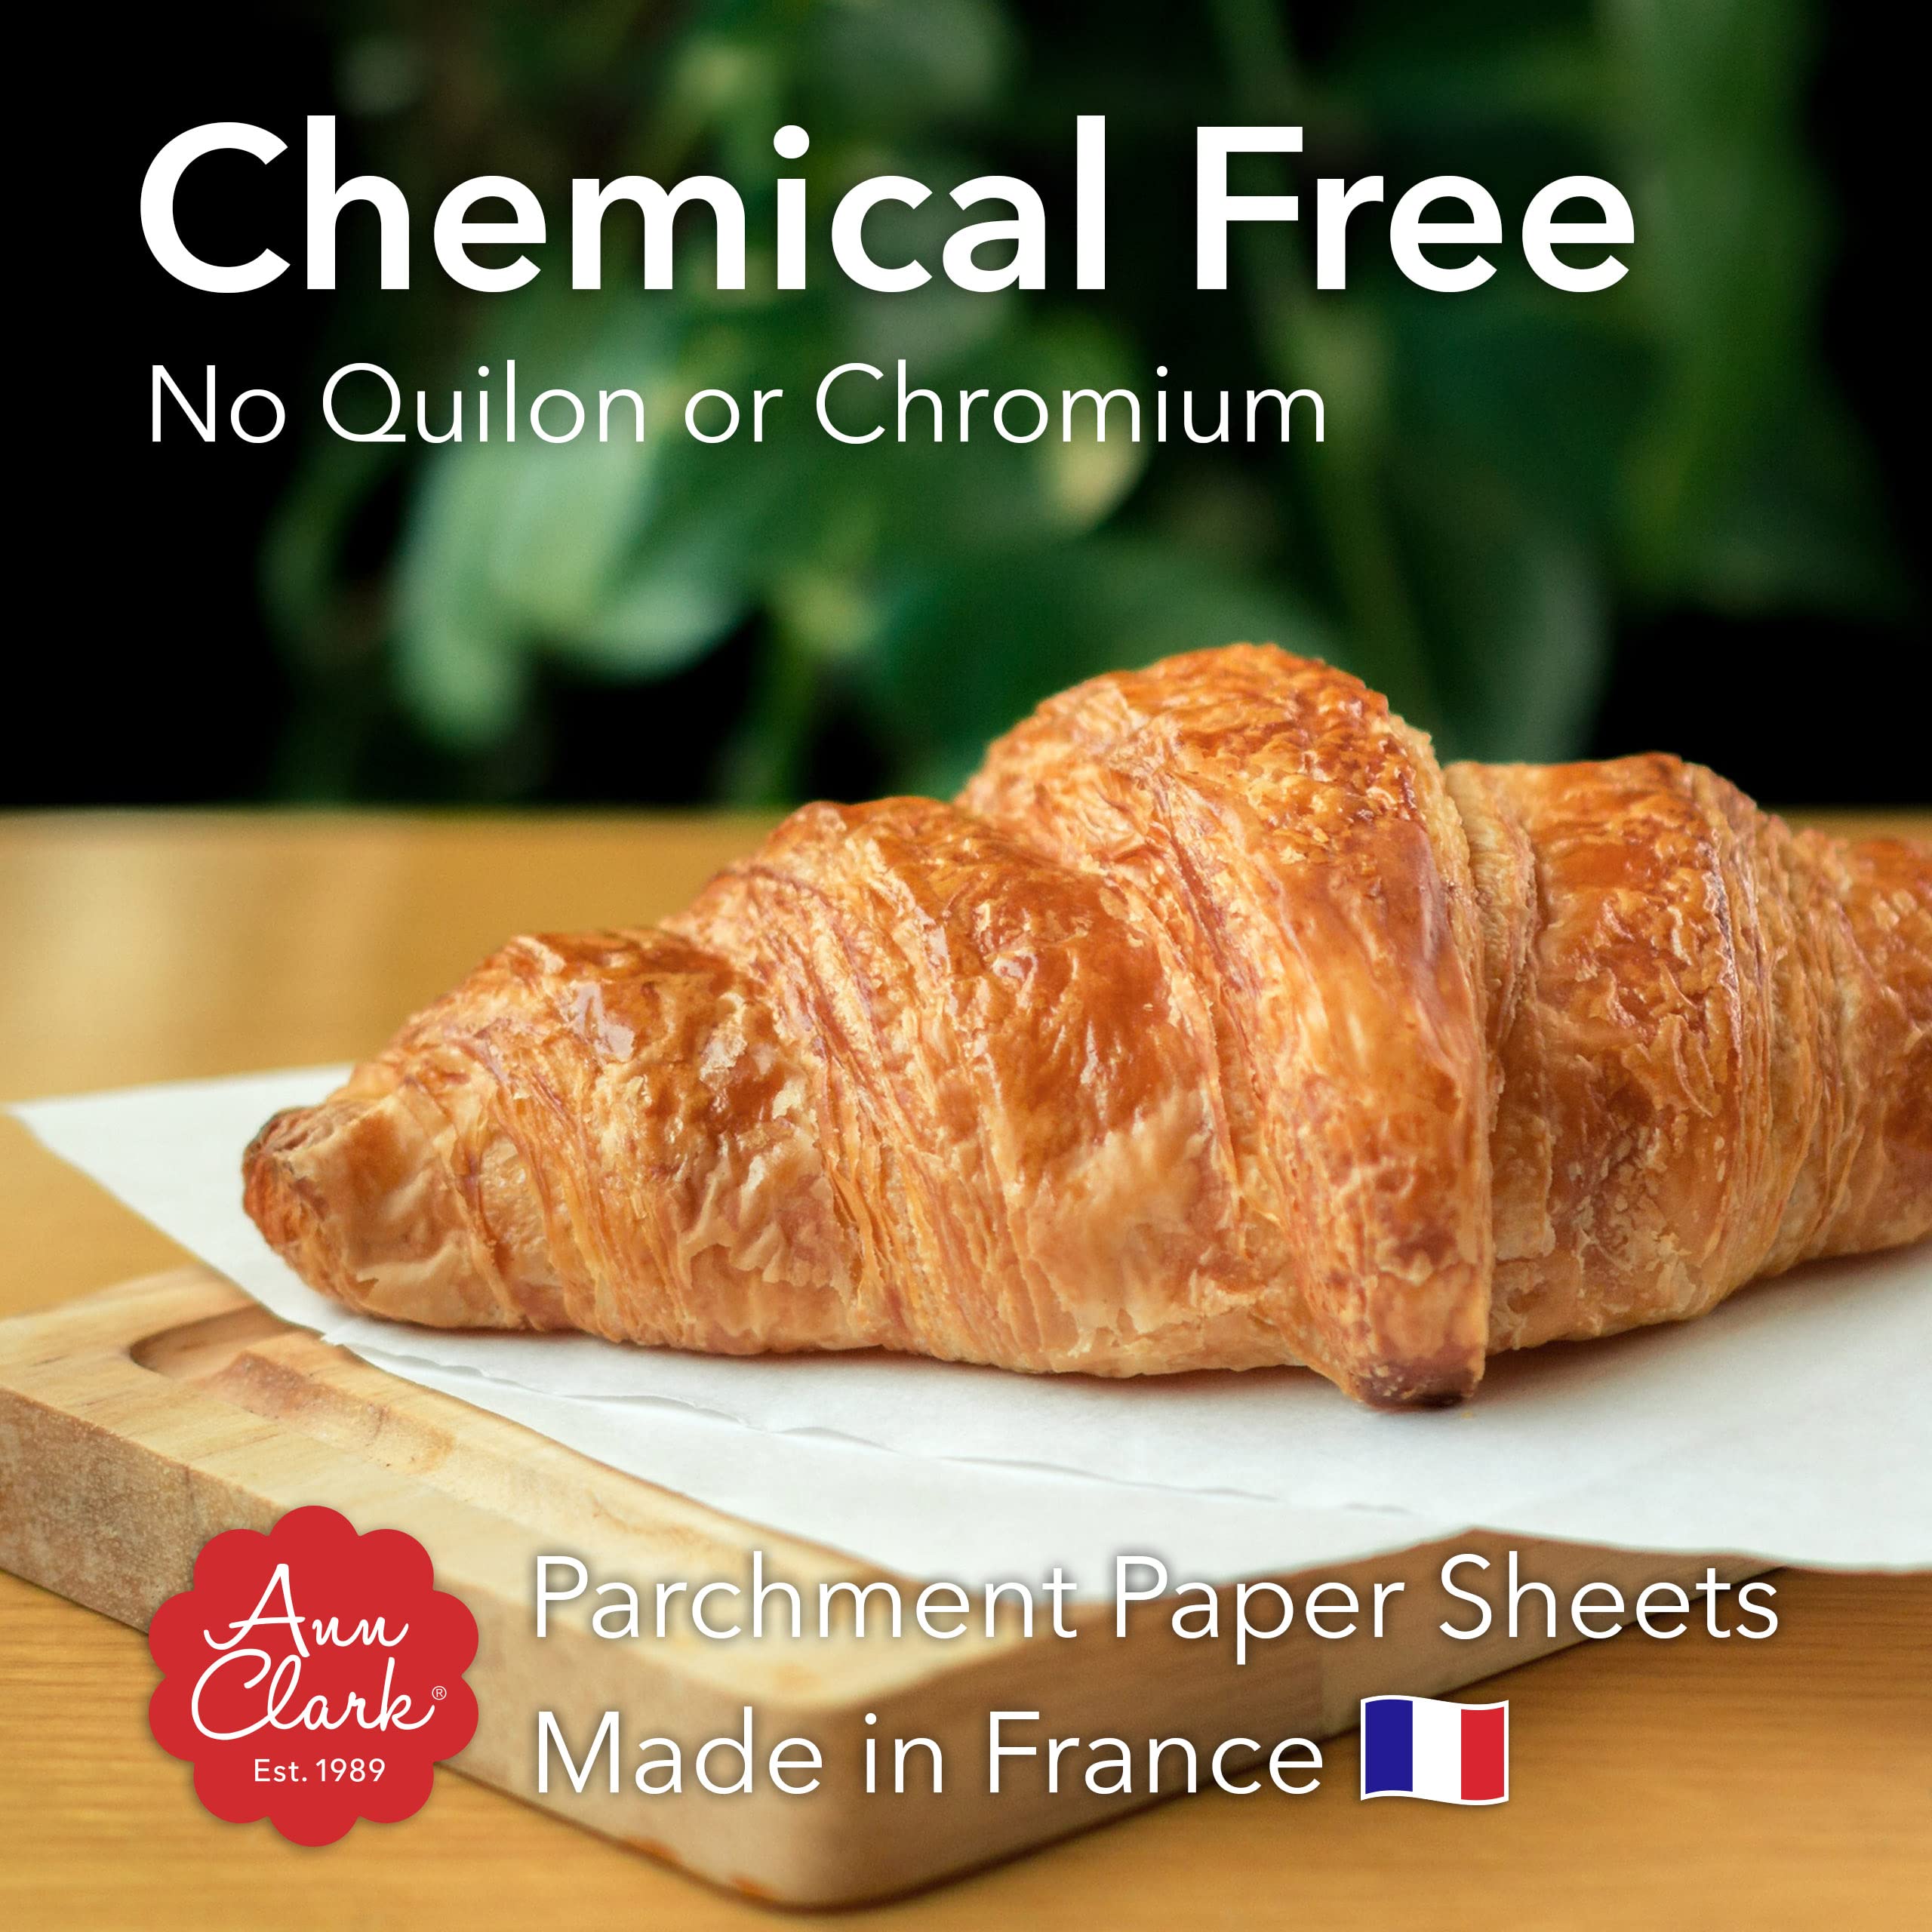 Ann Clark Parchment Paper Sheets for Baking, Made in France, Natural Nonstick 16" x 12" Precut 100 Sheets